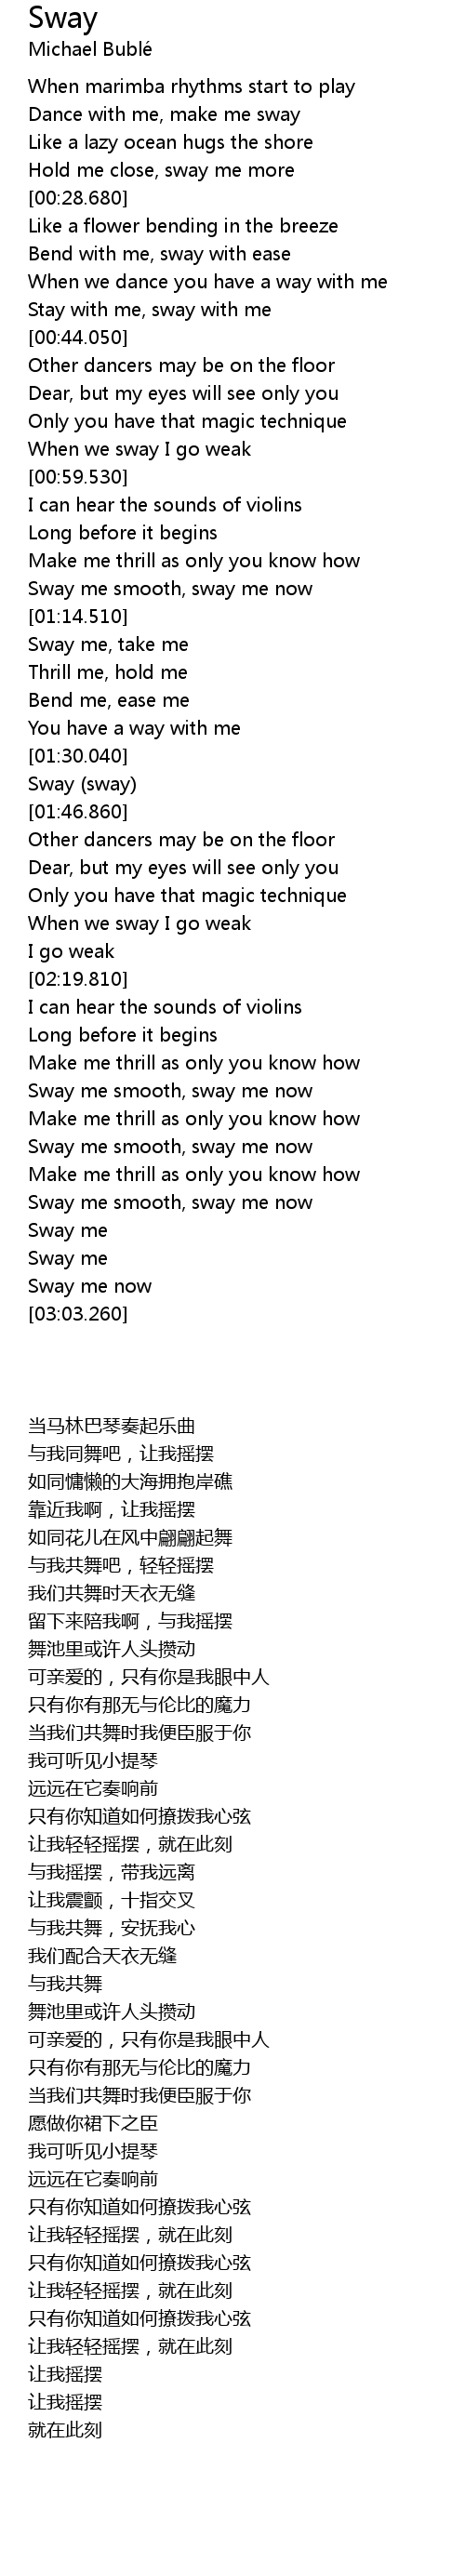 Sway Lyrics Follow Lyrics Like a flower bending in the breeze bend with me, sway with ease when we dance you have a way with me stay with me, sway with me. follow lyrics